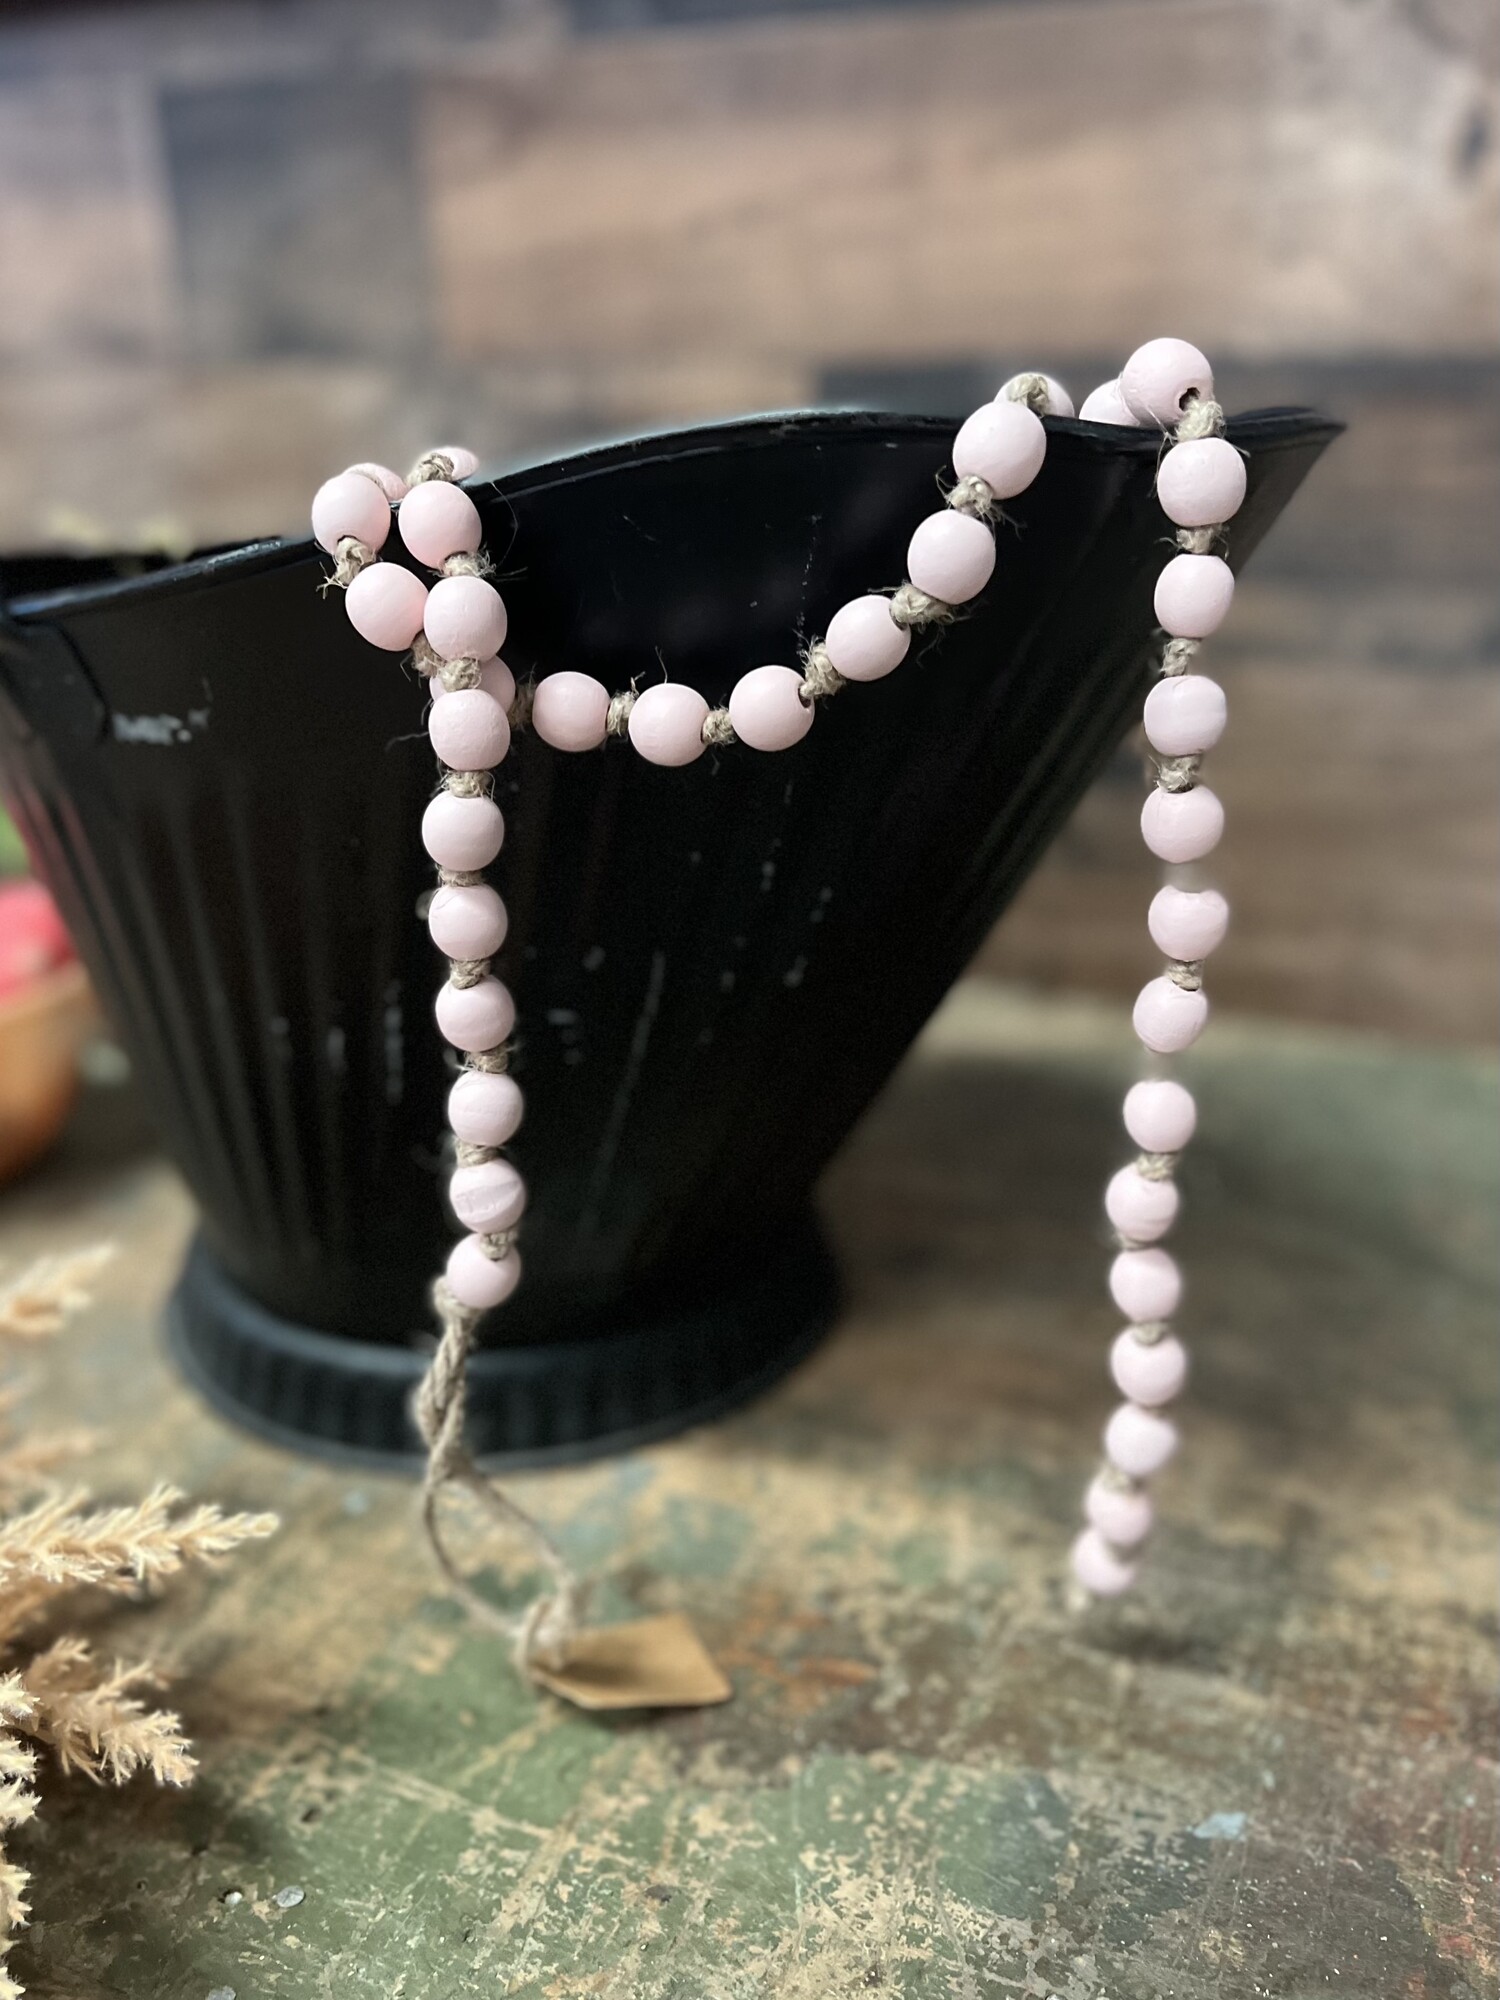 These beautiful soft pink wood beads are the perfect accent to any decor. Strand measures 38 inches in length